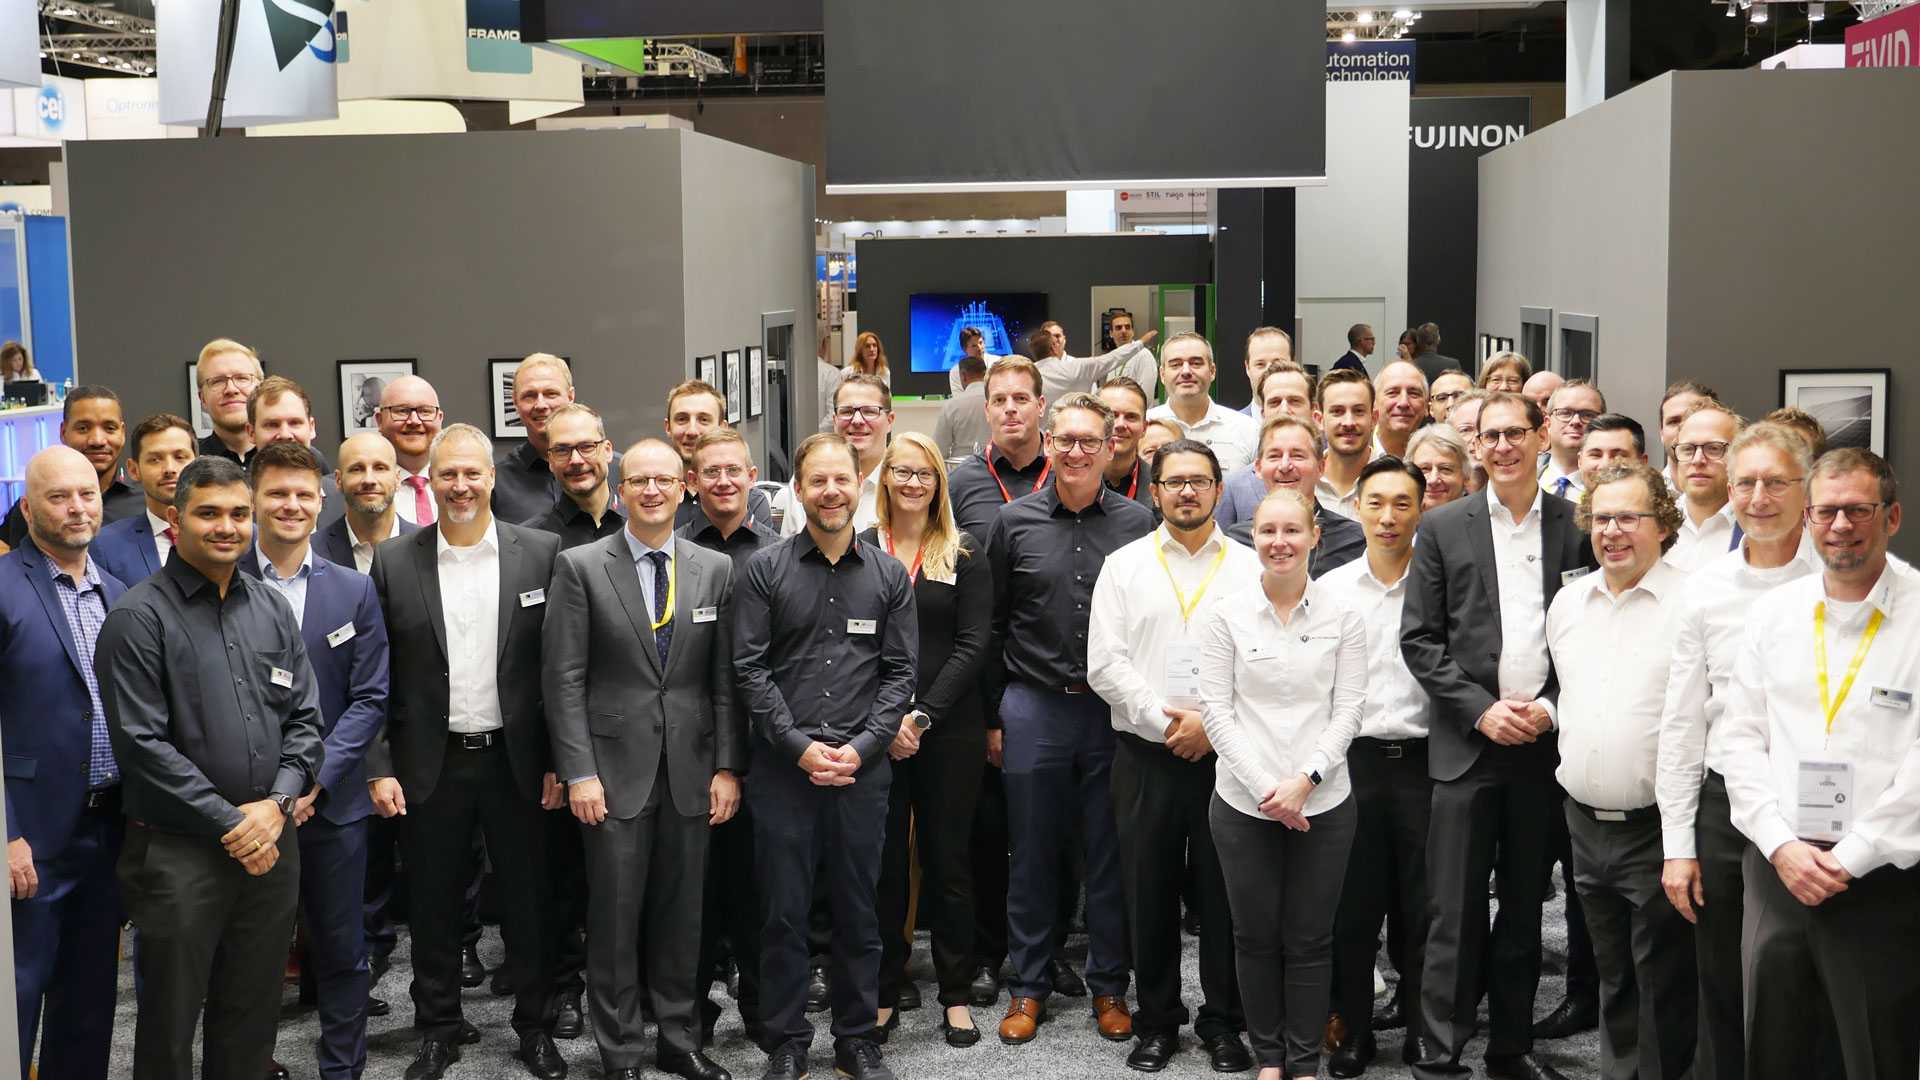 TKH Vision Further Strengthens and Expands Its Brand Presence In Second Year at VISION, Stuttgart